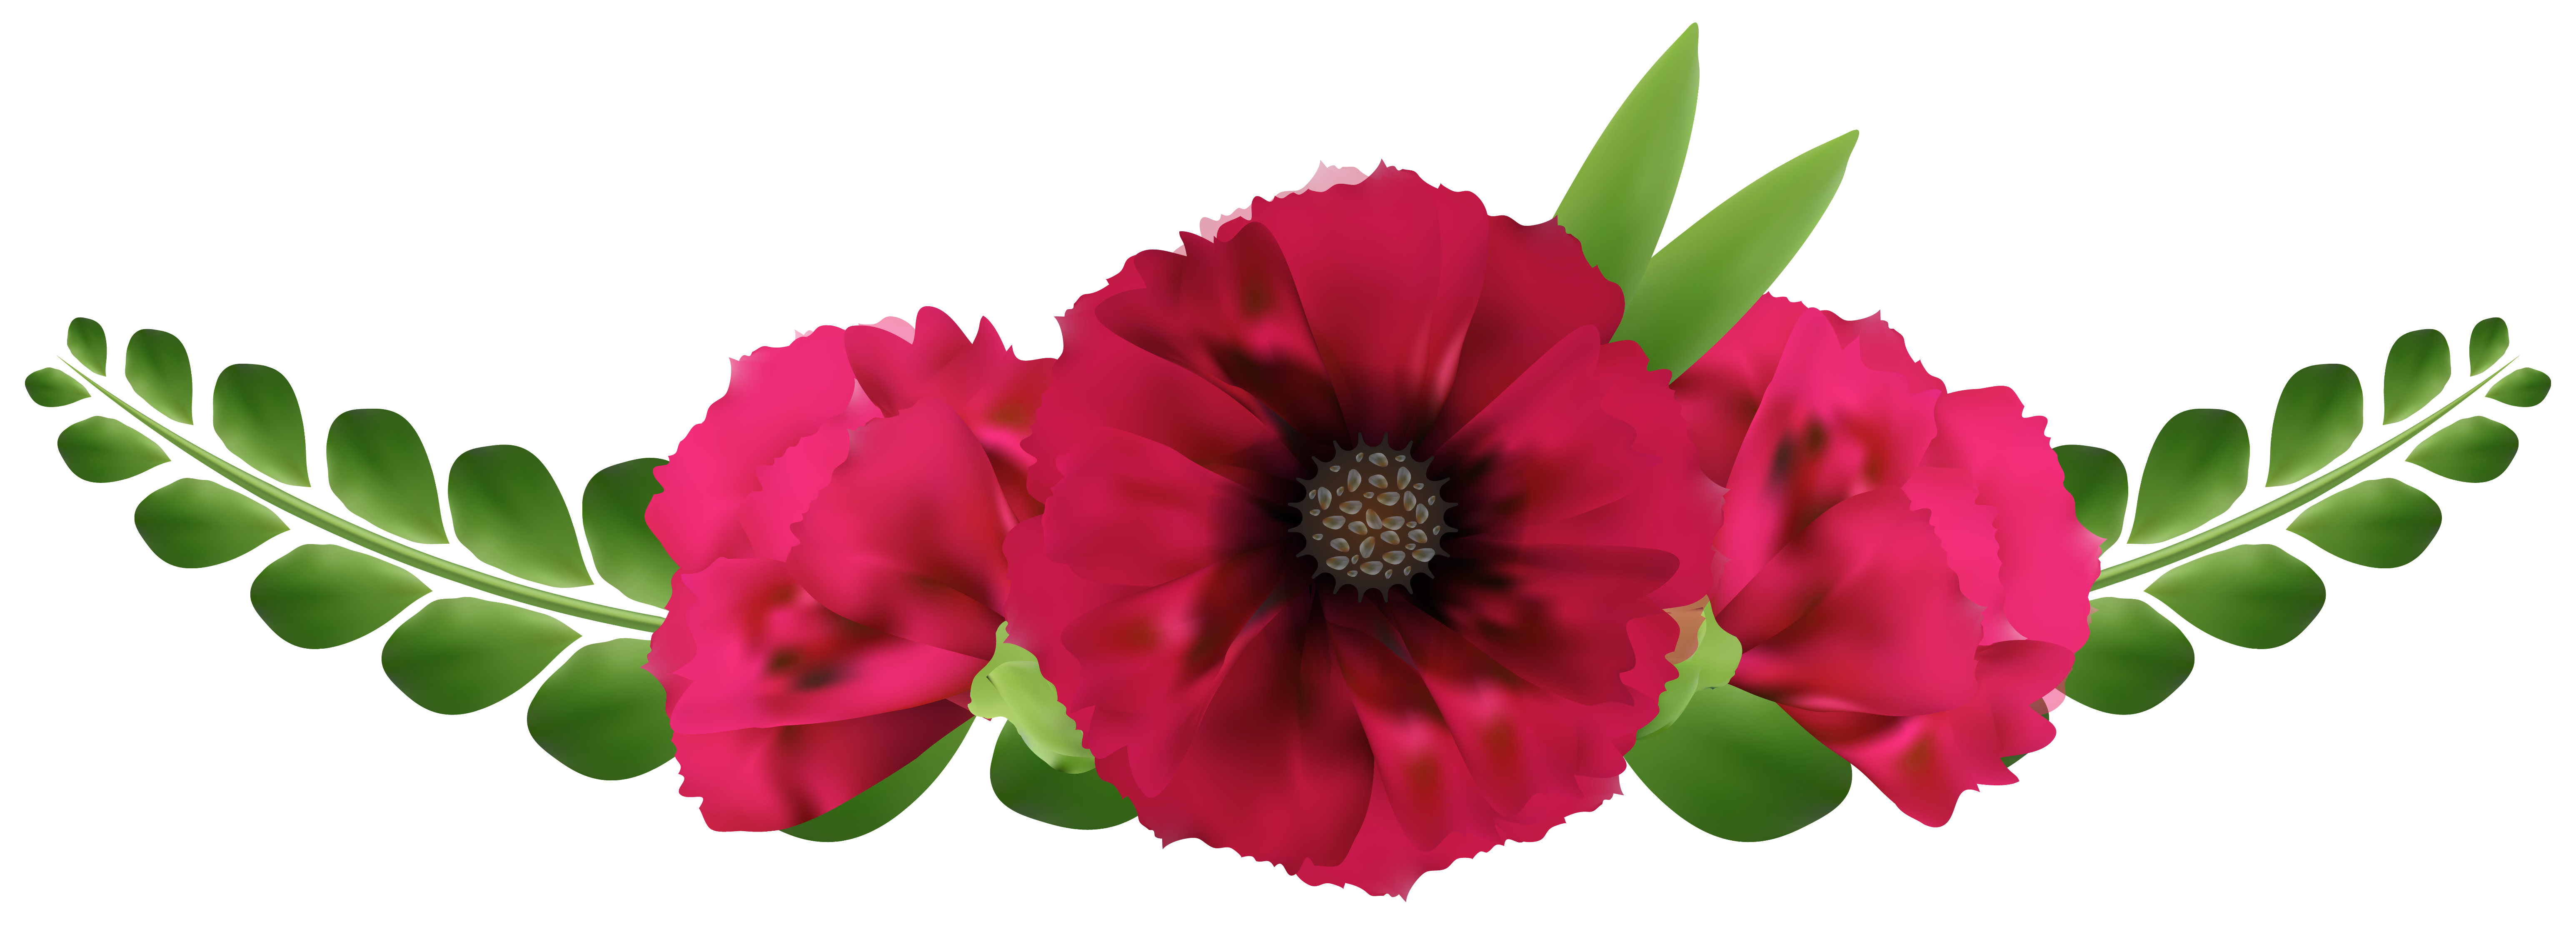 Stunning ideas beautiful clip. Flowers png images